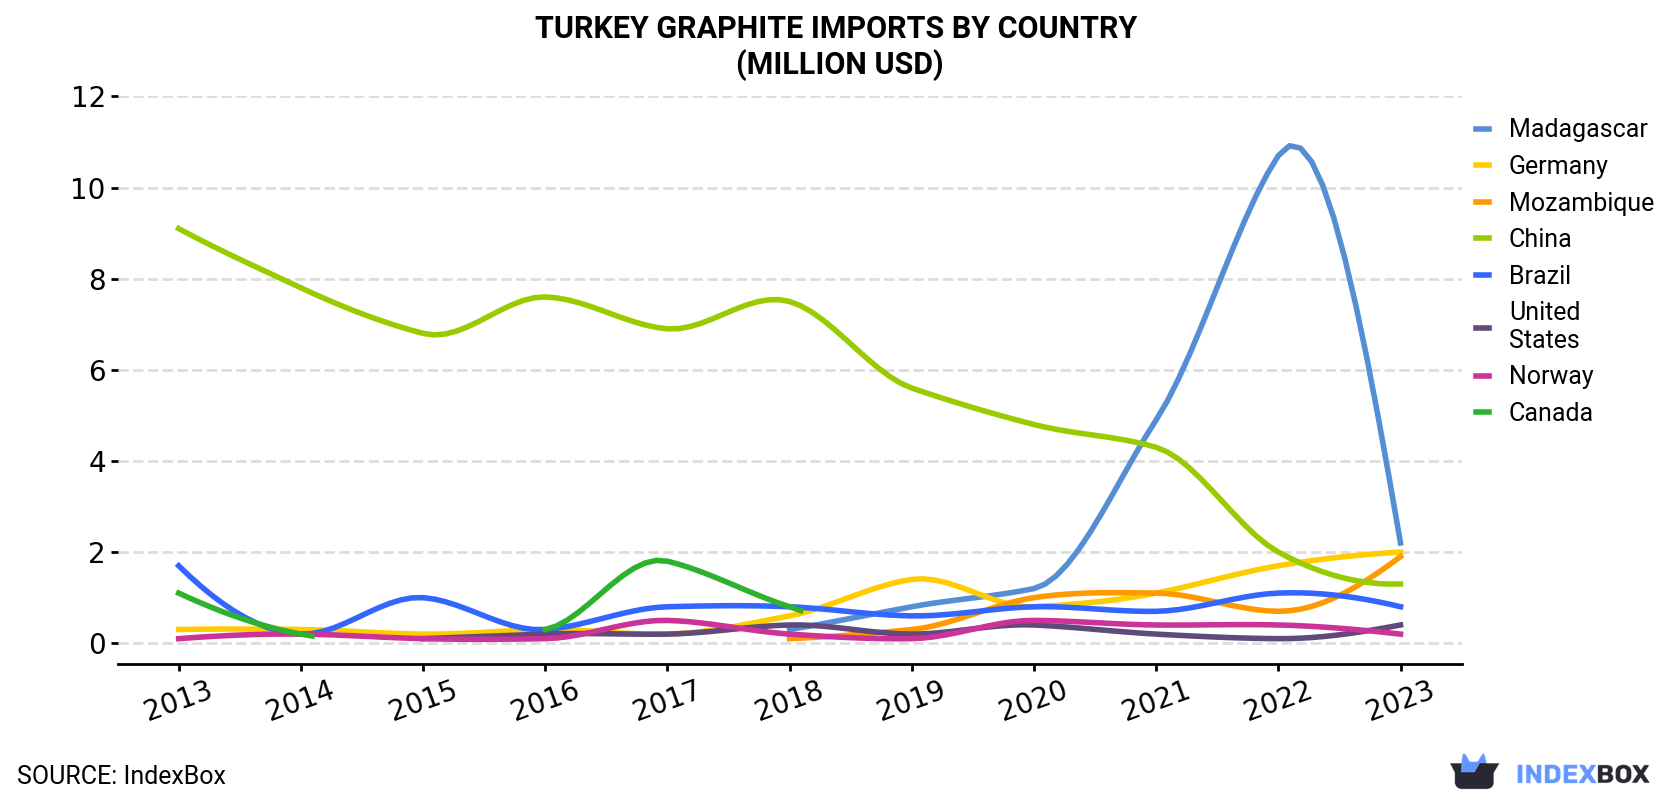 Turkey Graphite Imports By Country (Million USD)